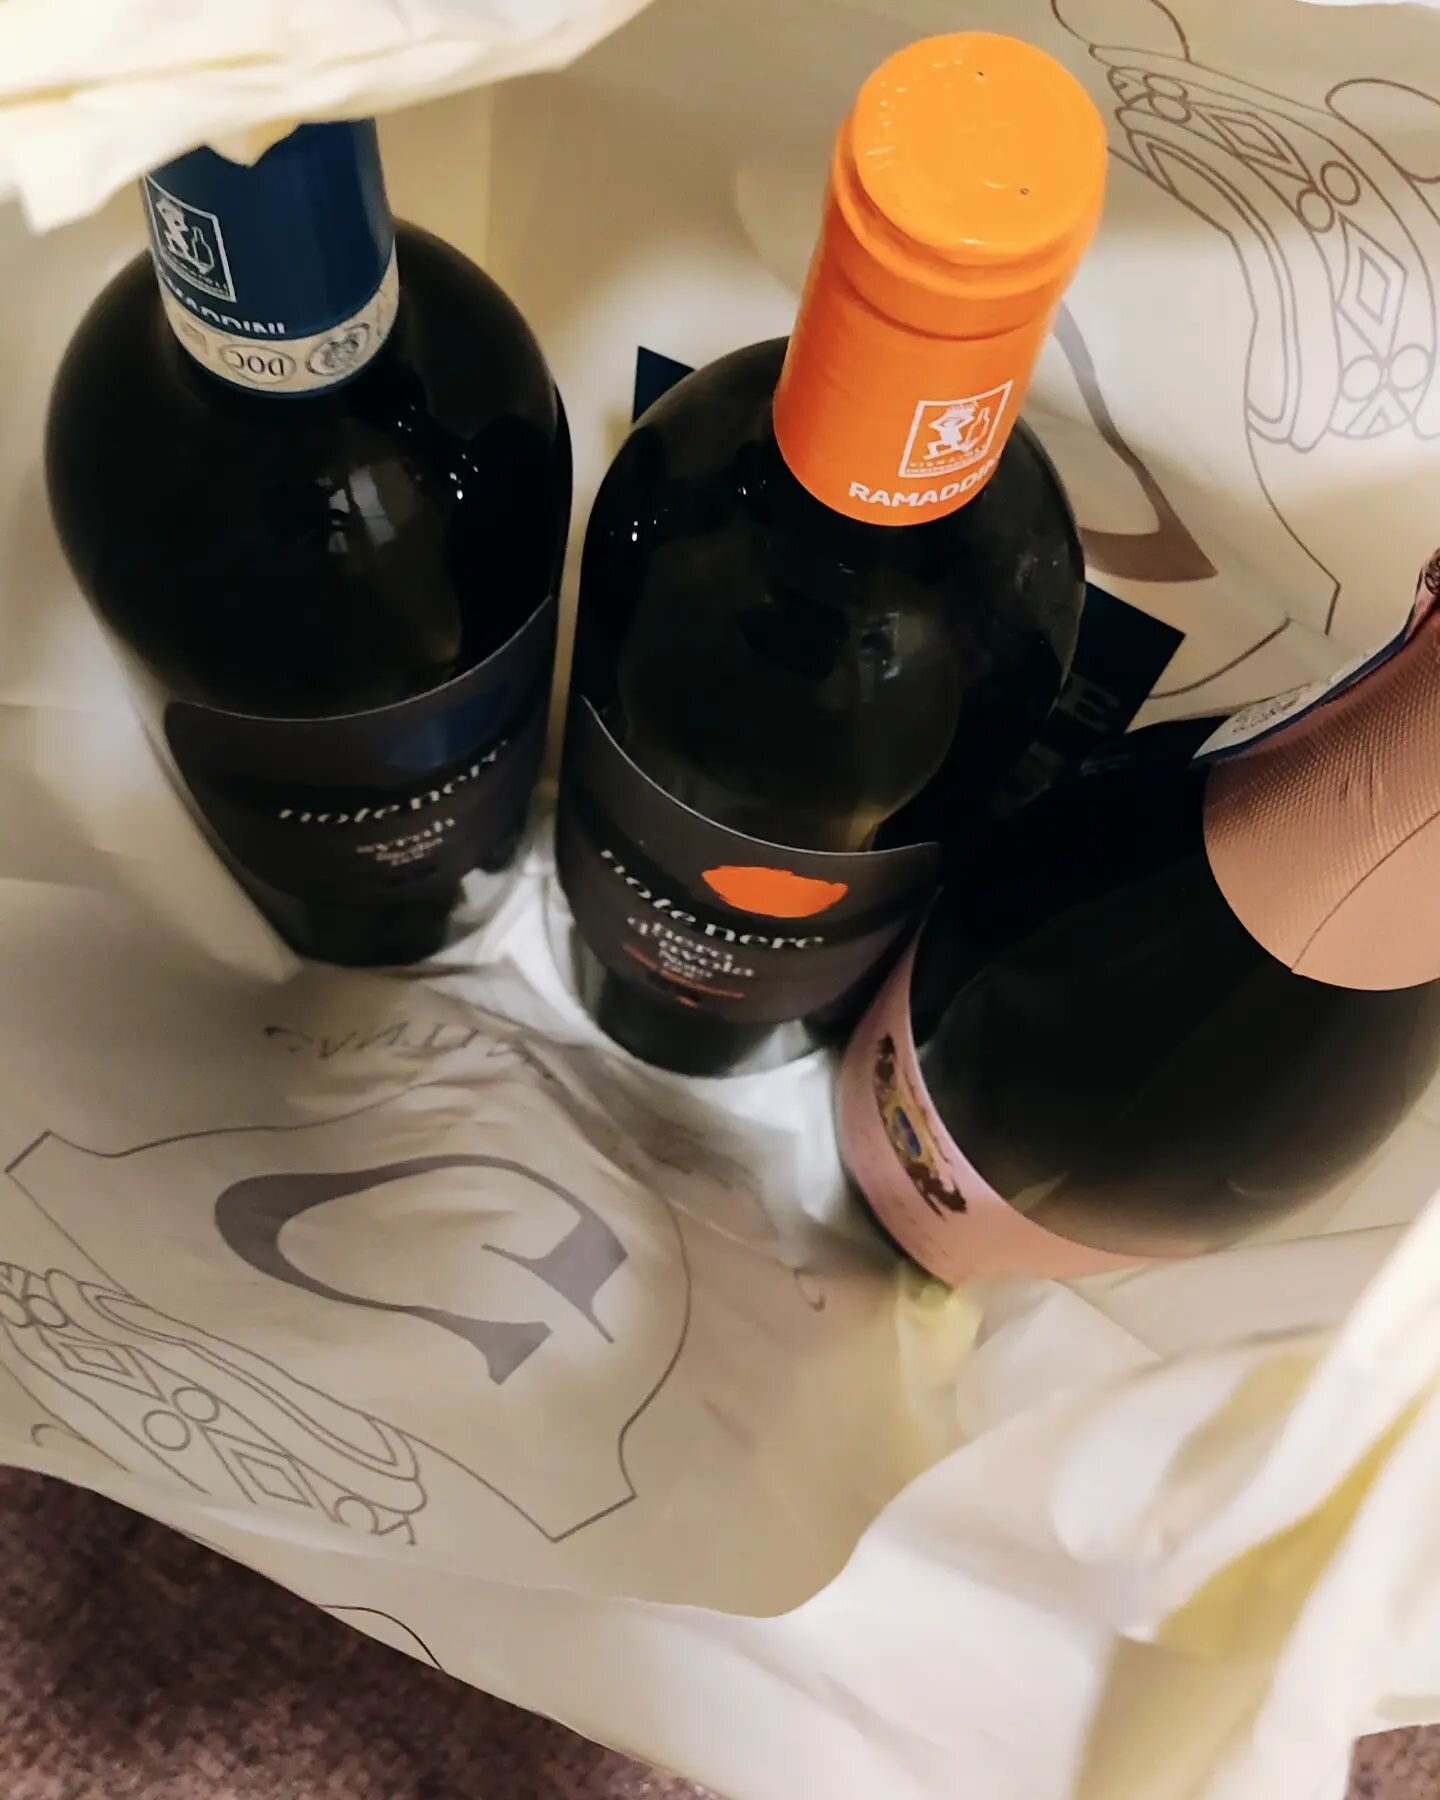 Friday Night Delivery😍

&quot;🍇 Proud to have been delivering Beeagle Wine to your doors via Deliveroo for three fantastic years! Cheers to the journey and many more to come. 🥂 #BeeagleWine #ThreeYearsStrong #DeliverooDelights&quot;